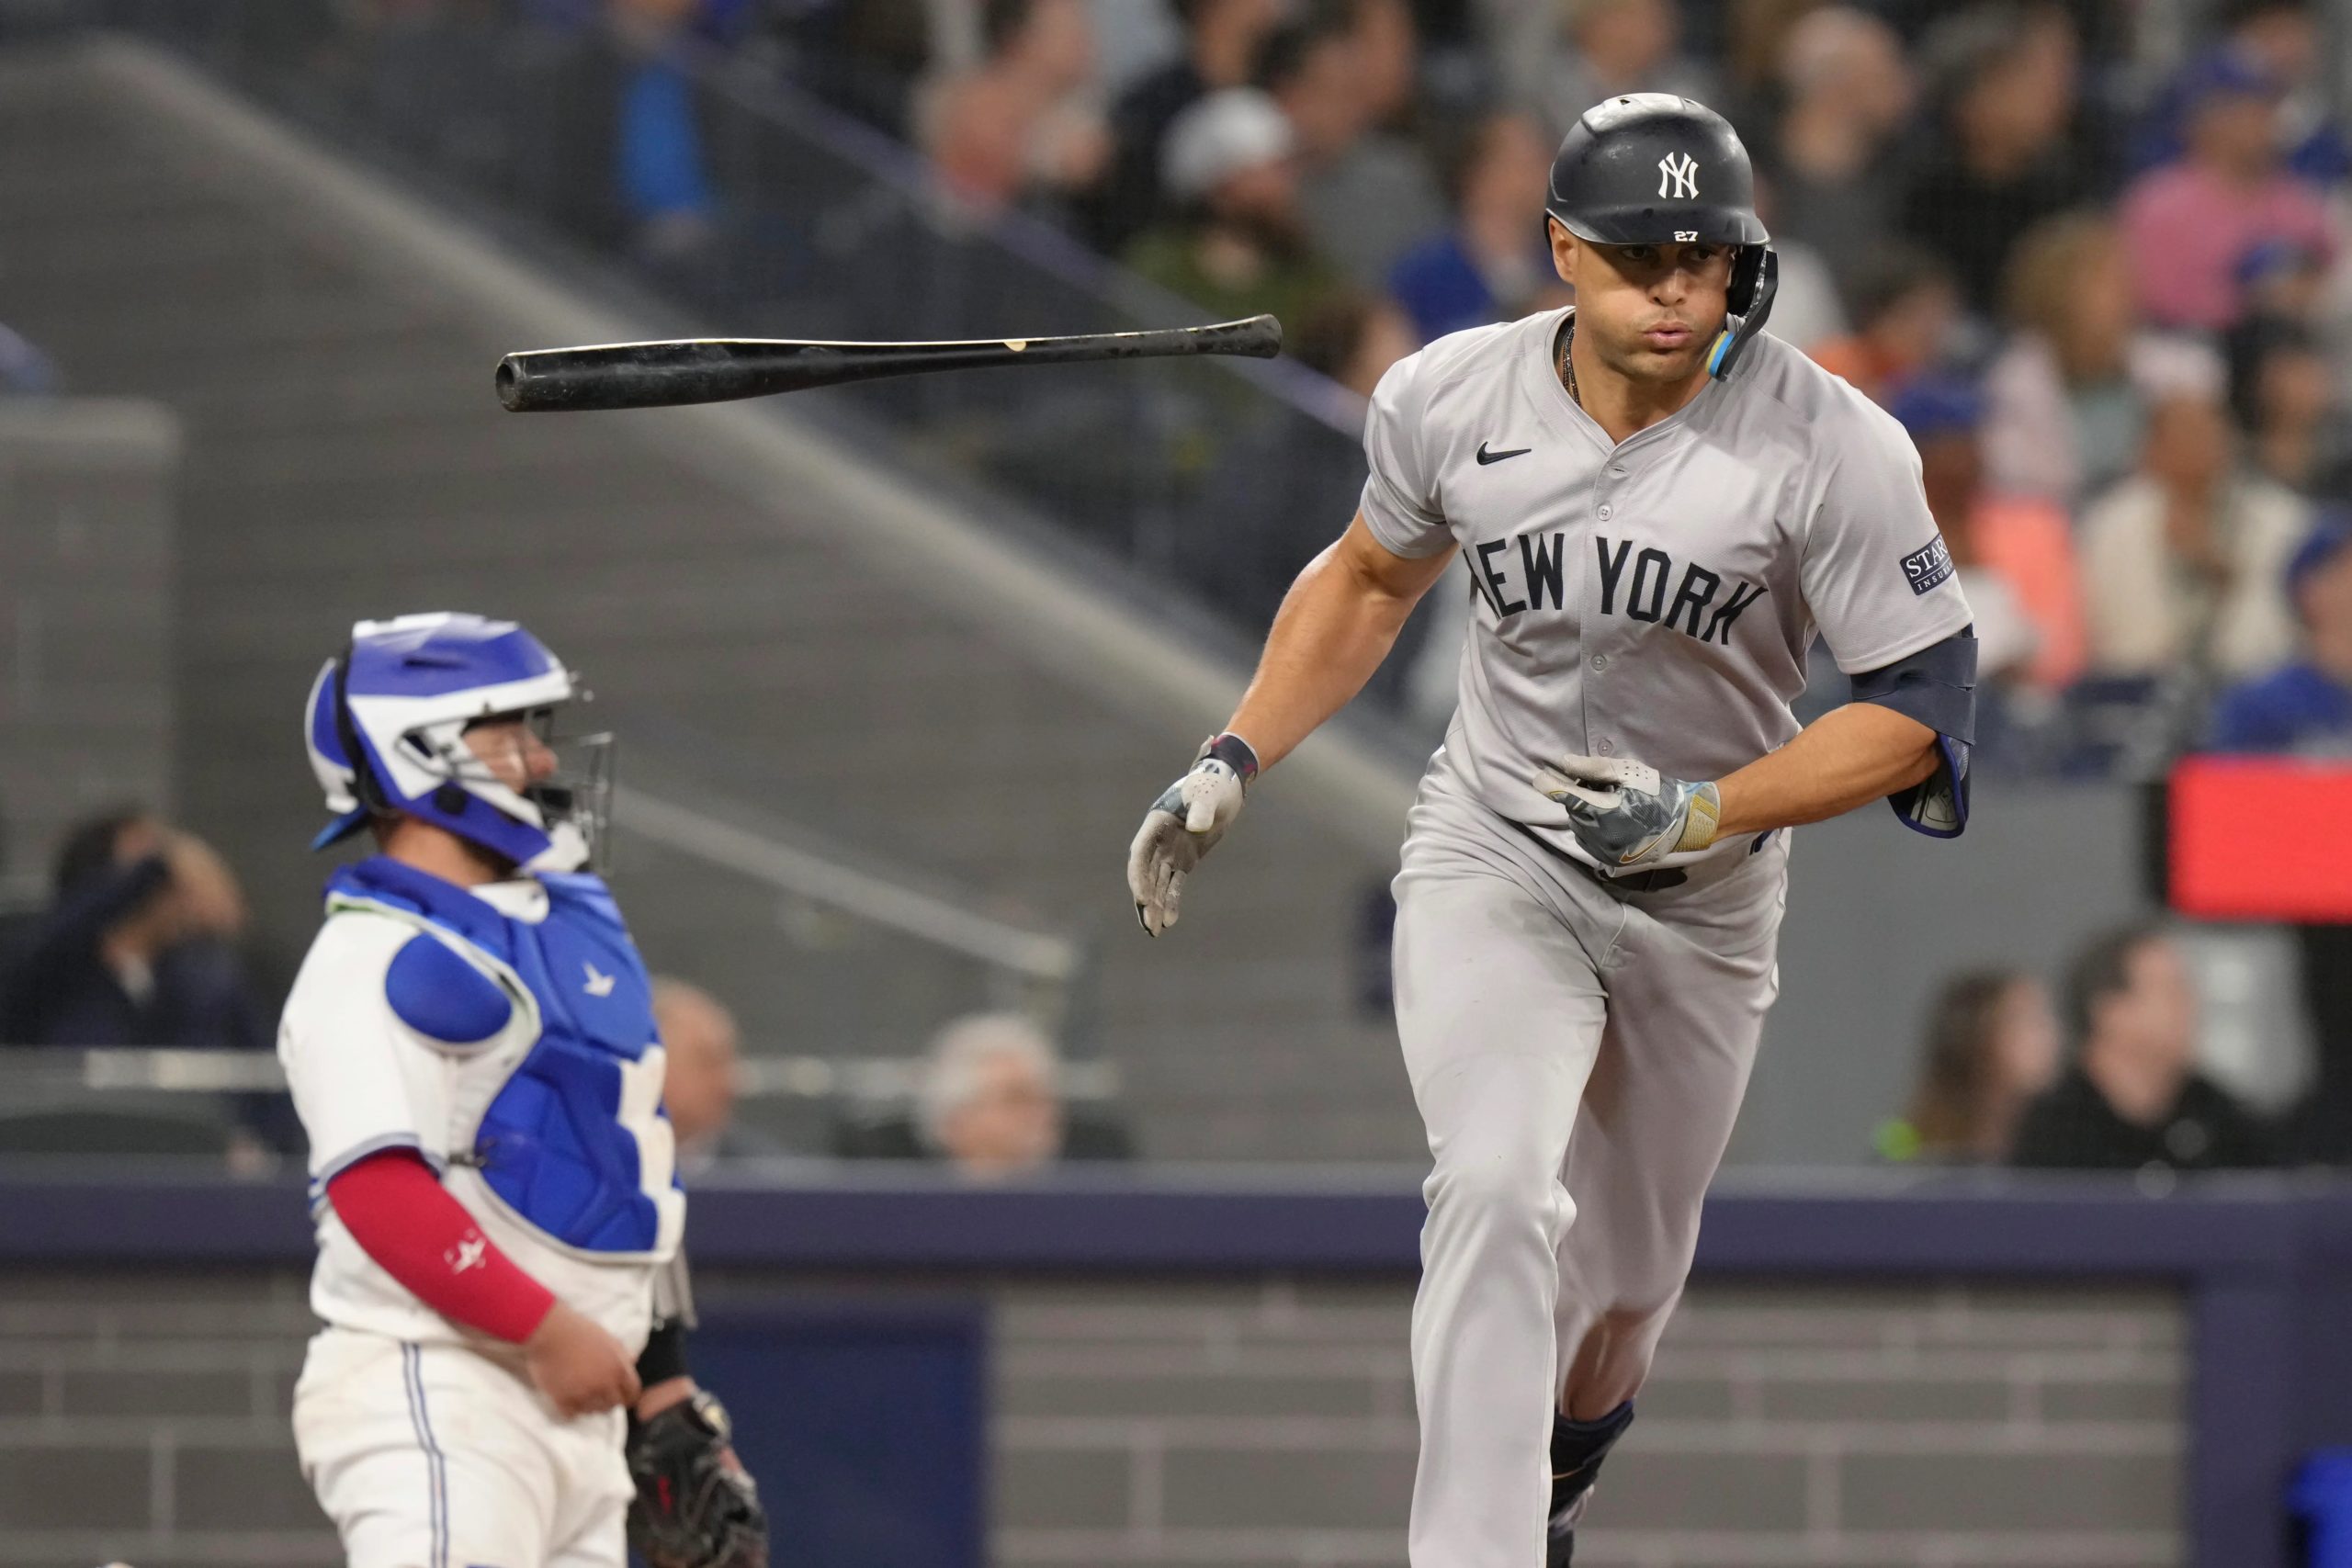 Yankees Crazy Comeback vs Blue Jays: One of The Best Games This Season, Avoid Sweep and Snap 3 Game Losing Streak